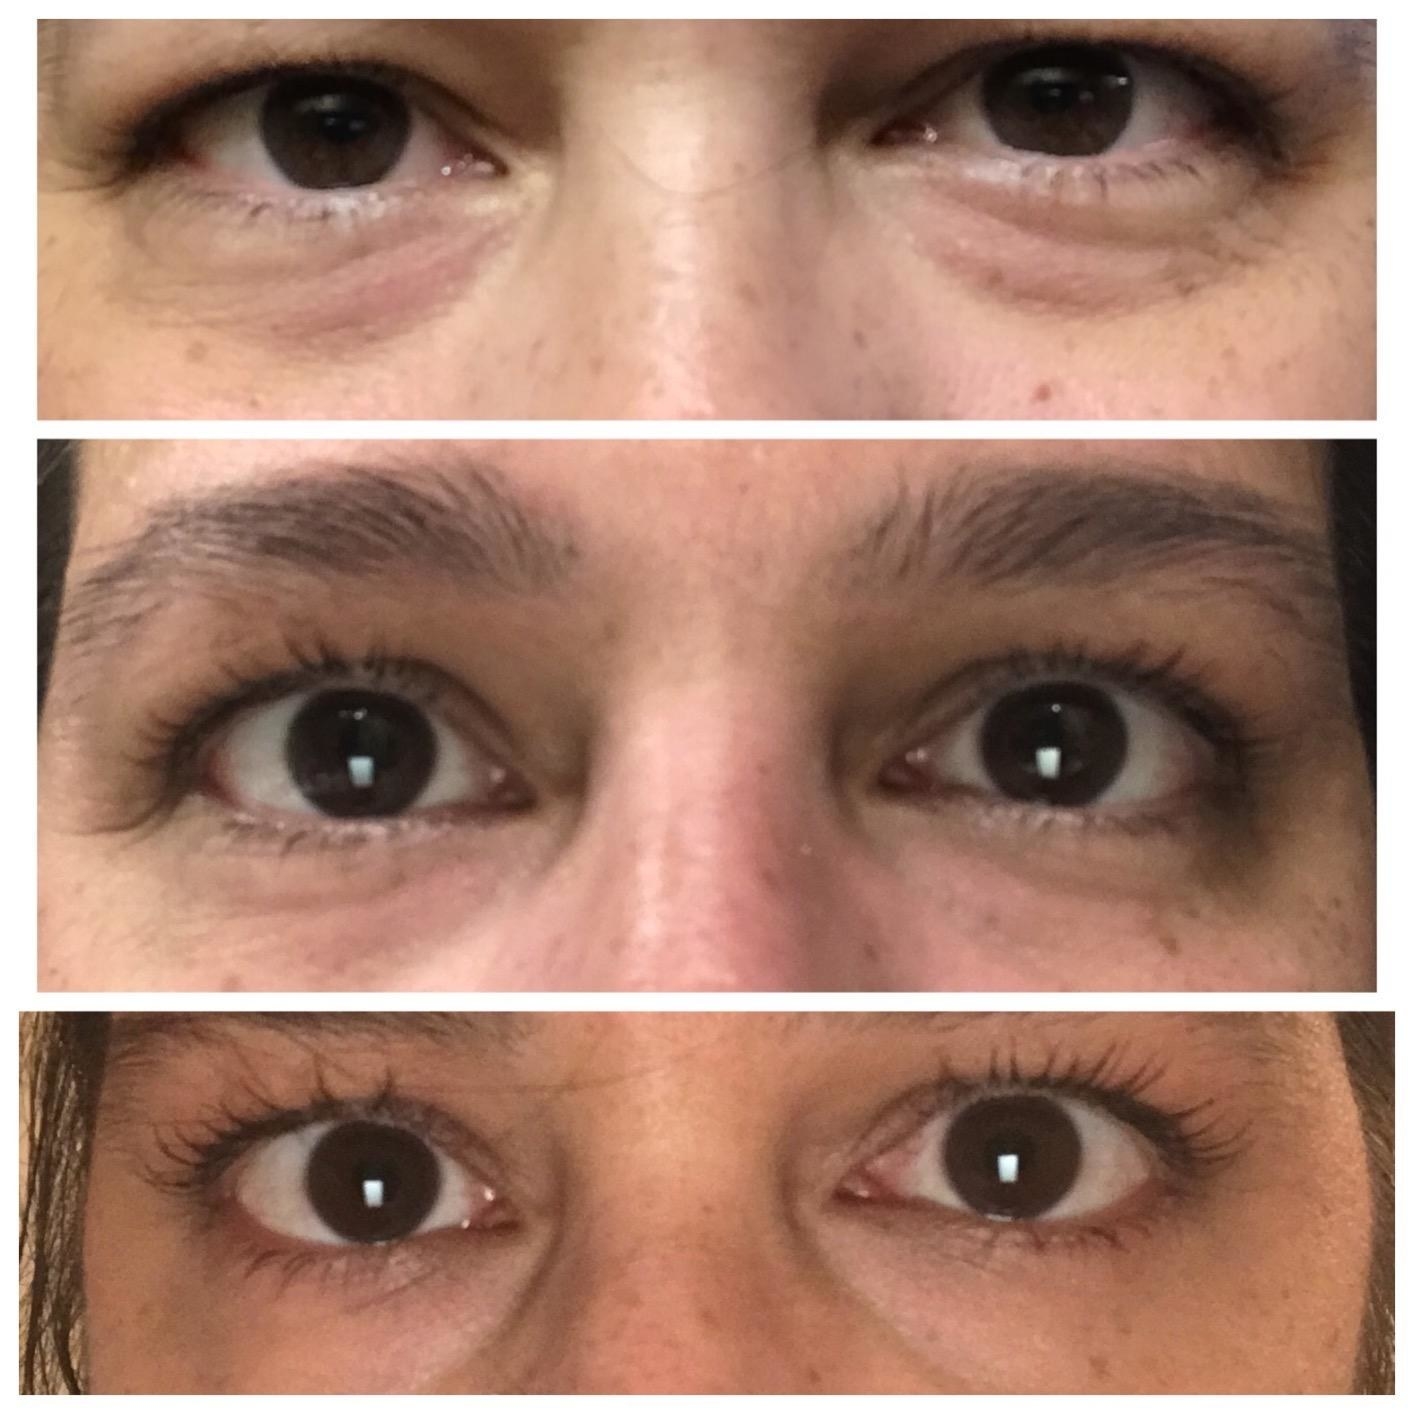 A reviewer&#x27;s progress using the eye cream in three images, showing reduces puffiness and dark circles